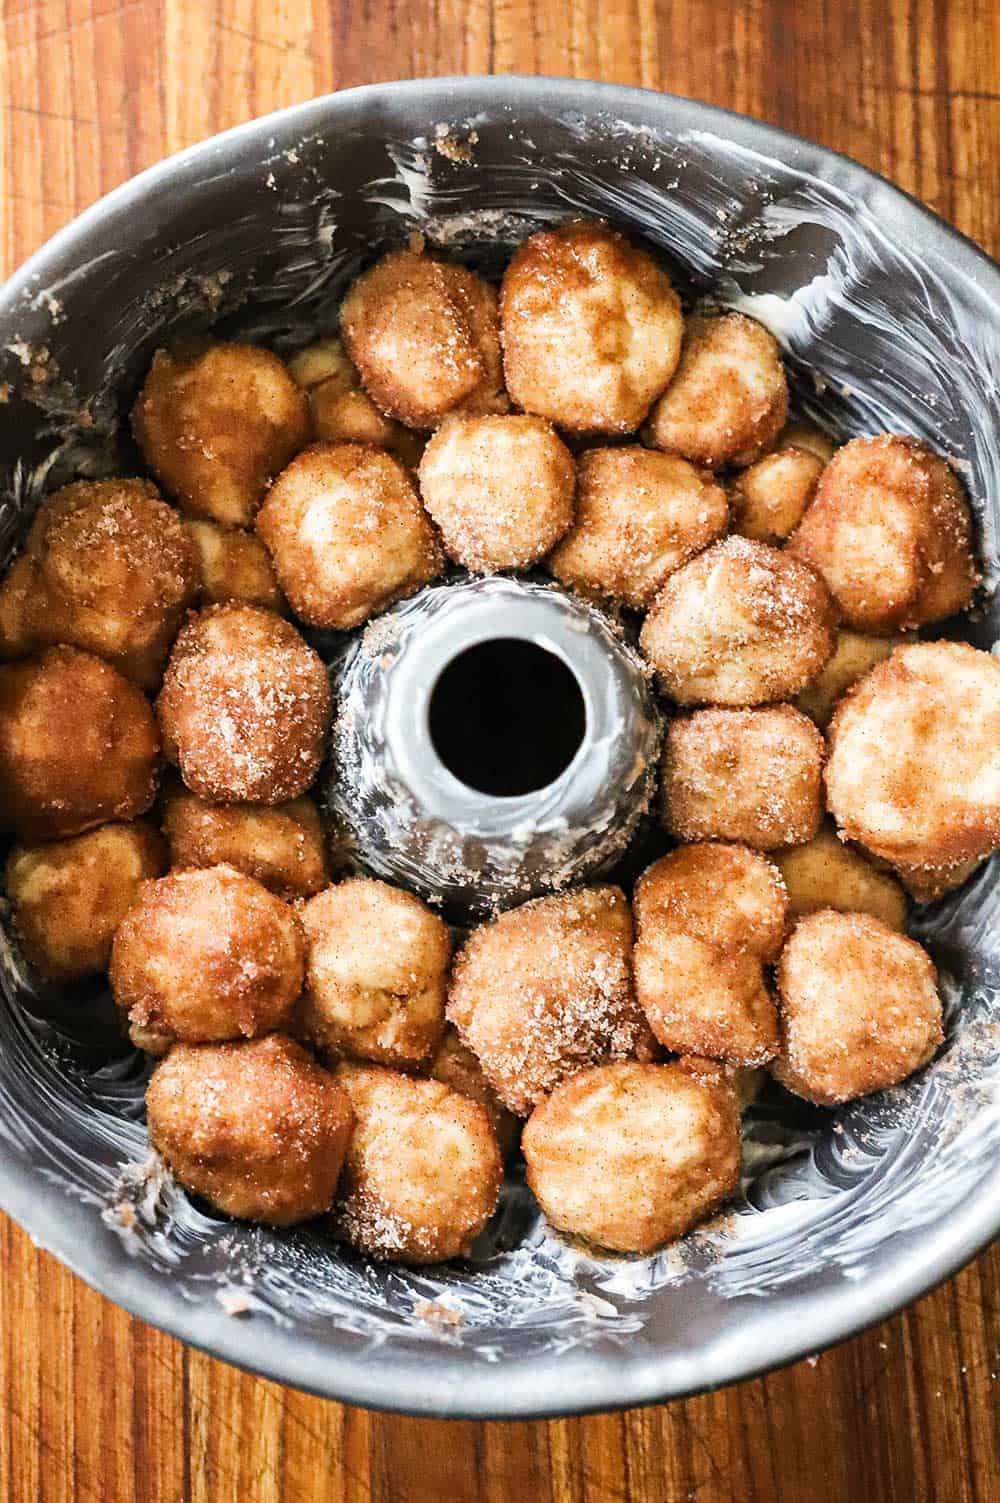 Uncooked balls of dough that are coated in butter and cinnamon sugar sitting in a greased bundt pan.